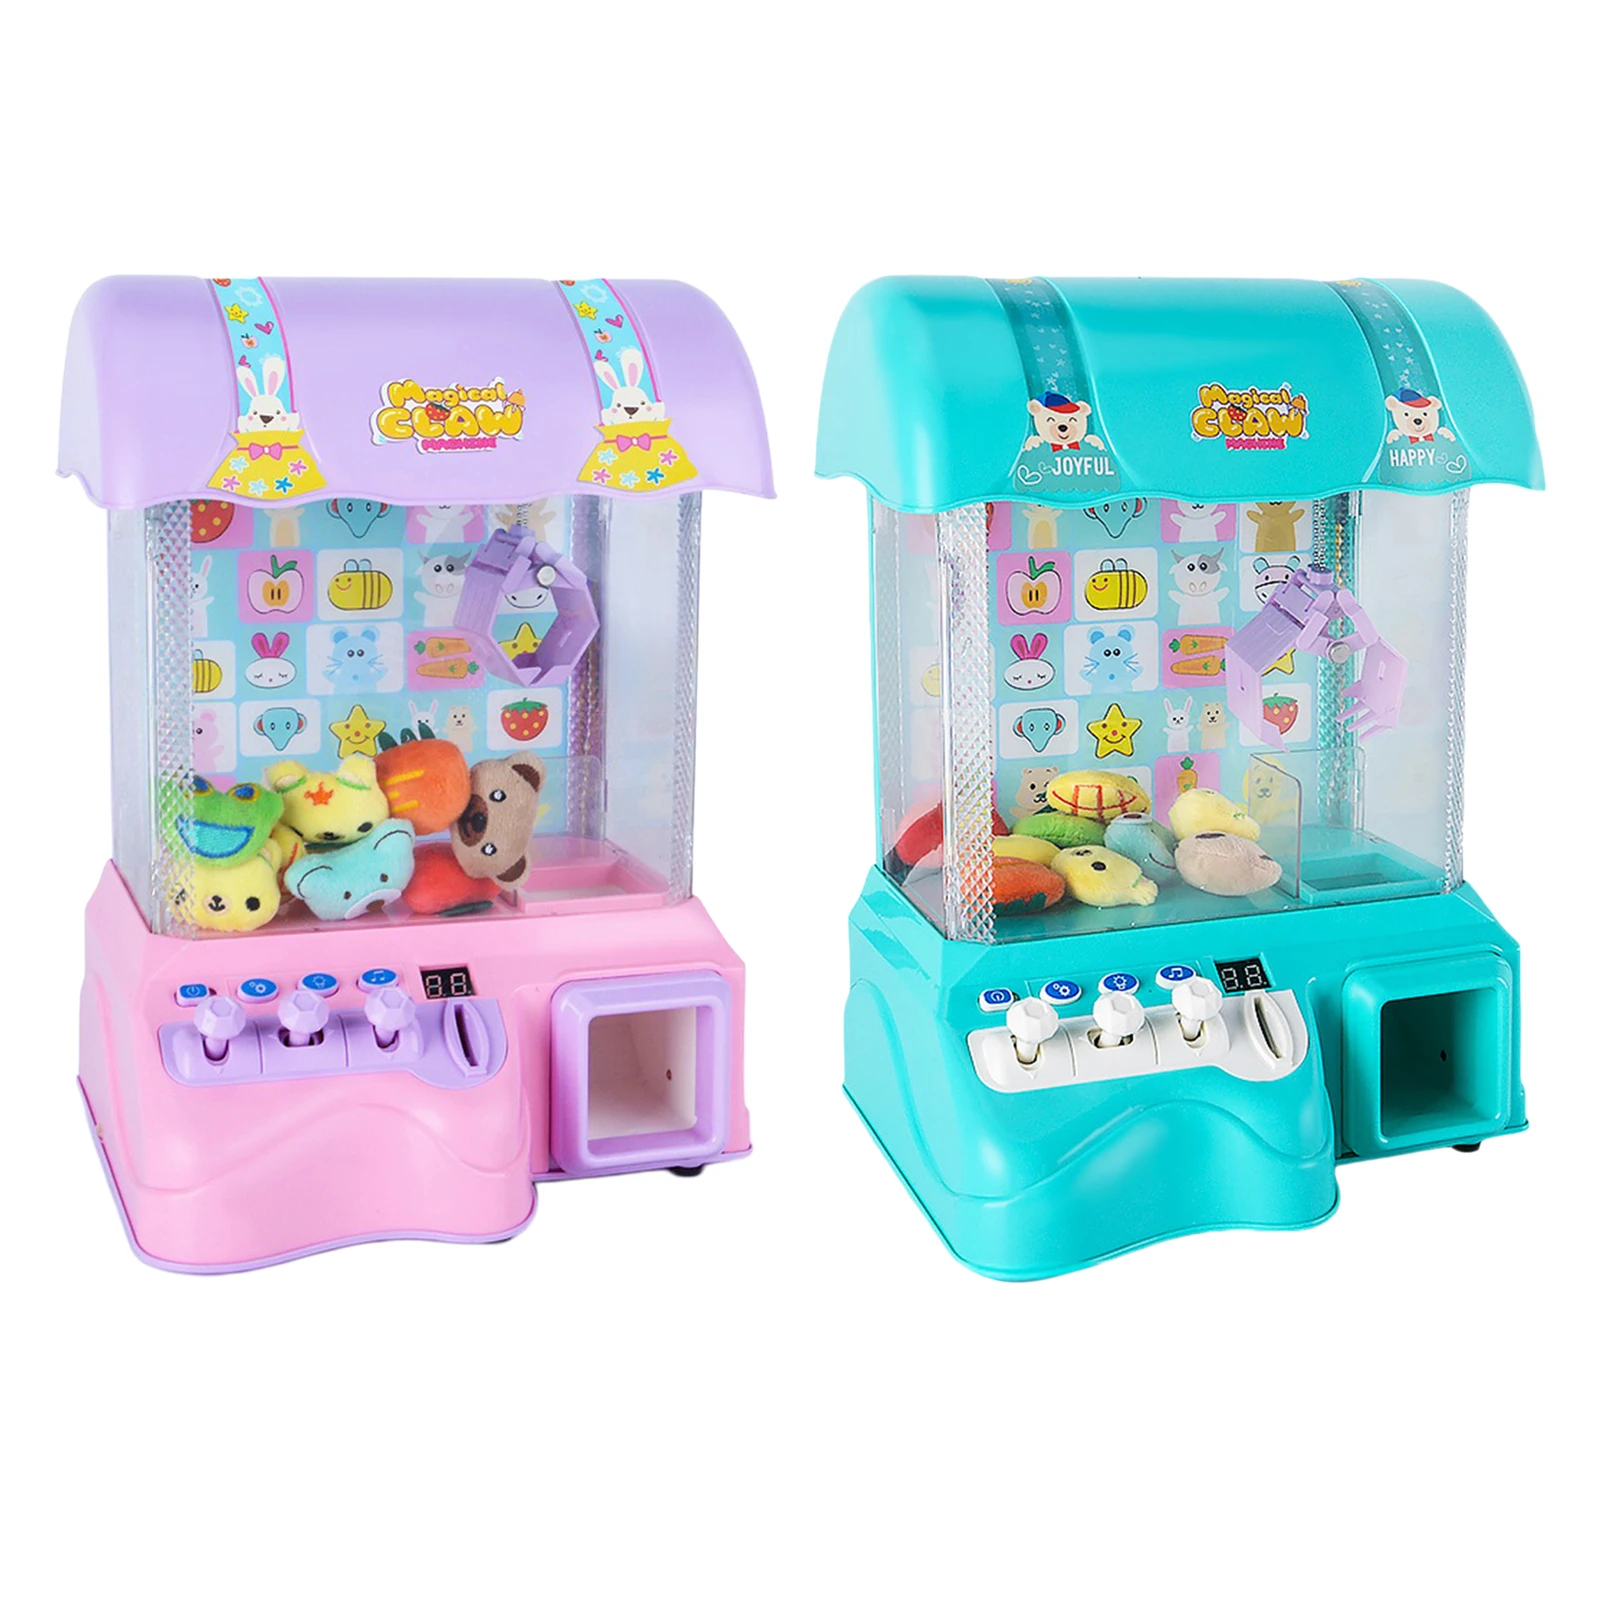 Electric Arcade Claw Machine Coin Game Doll Machine Grabber Toy Playset Box w/ Lights & Sounds